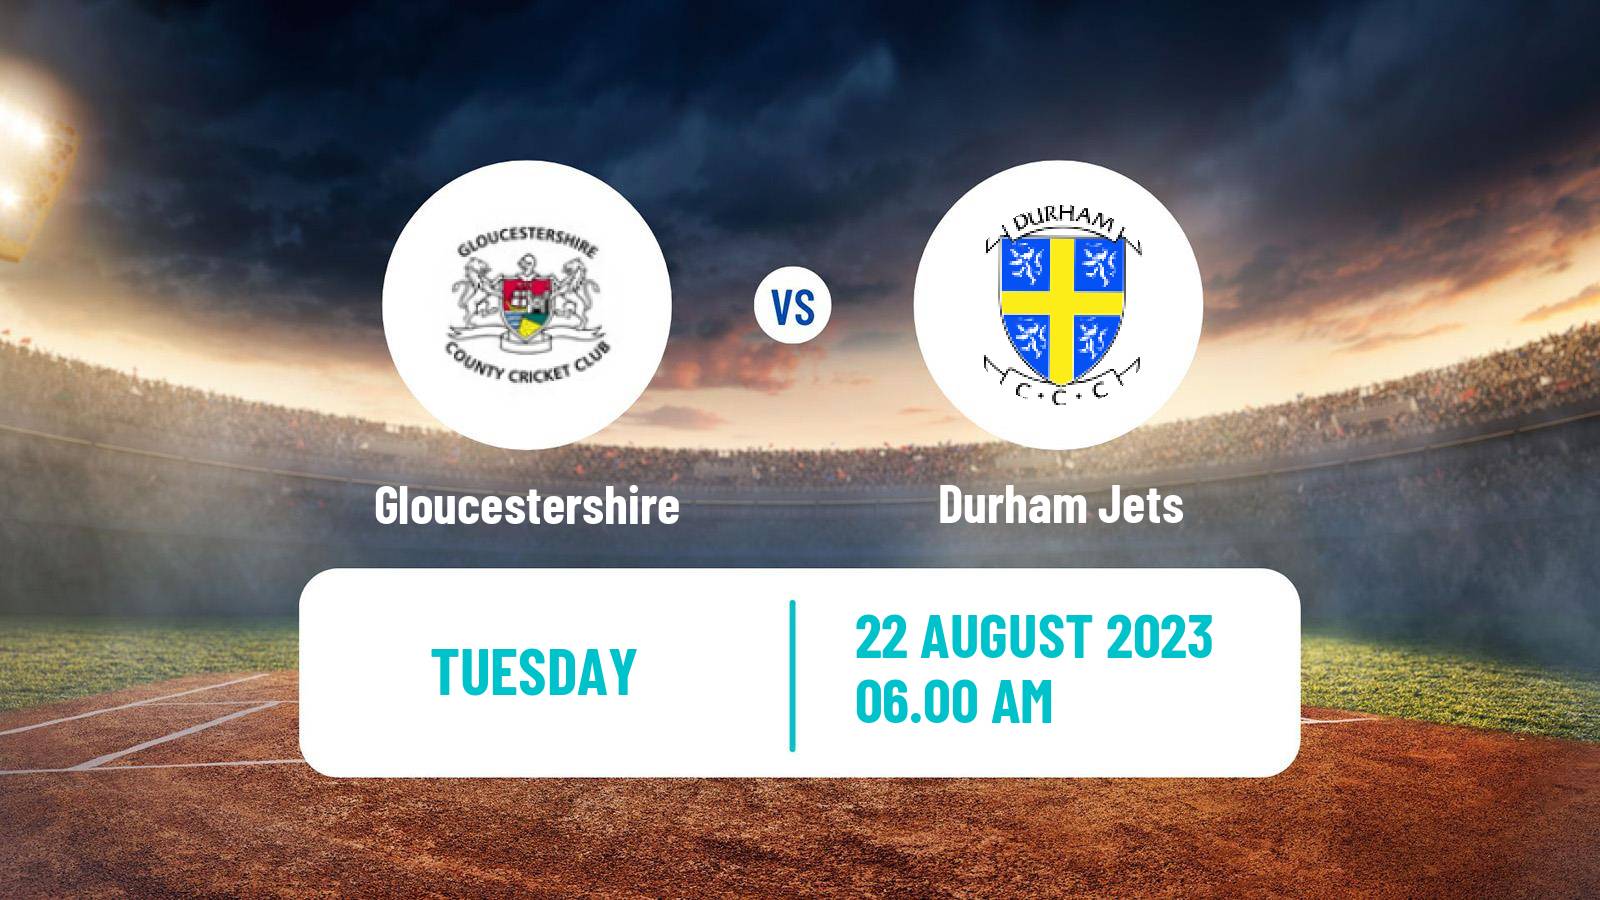 Cricket Royal London One-Day Cup Gloucestershire - Durham